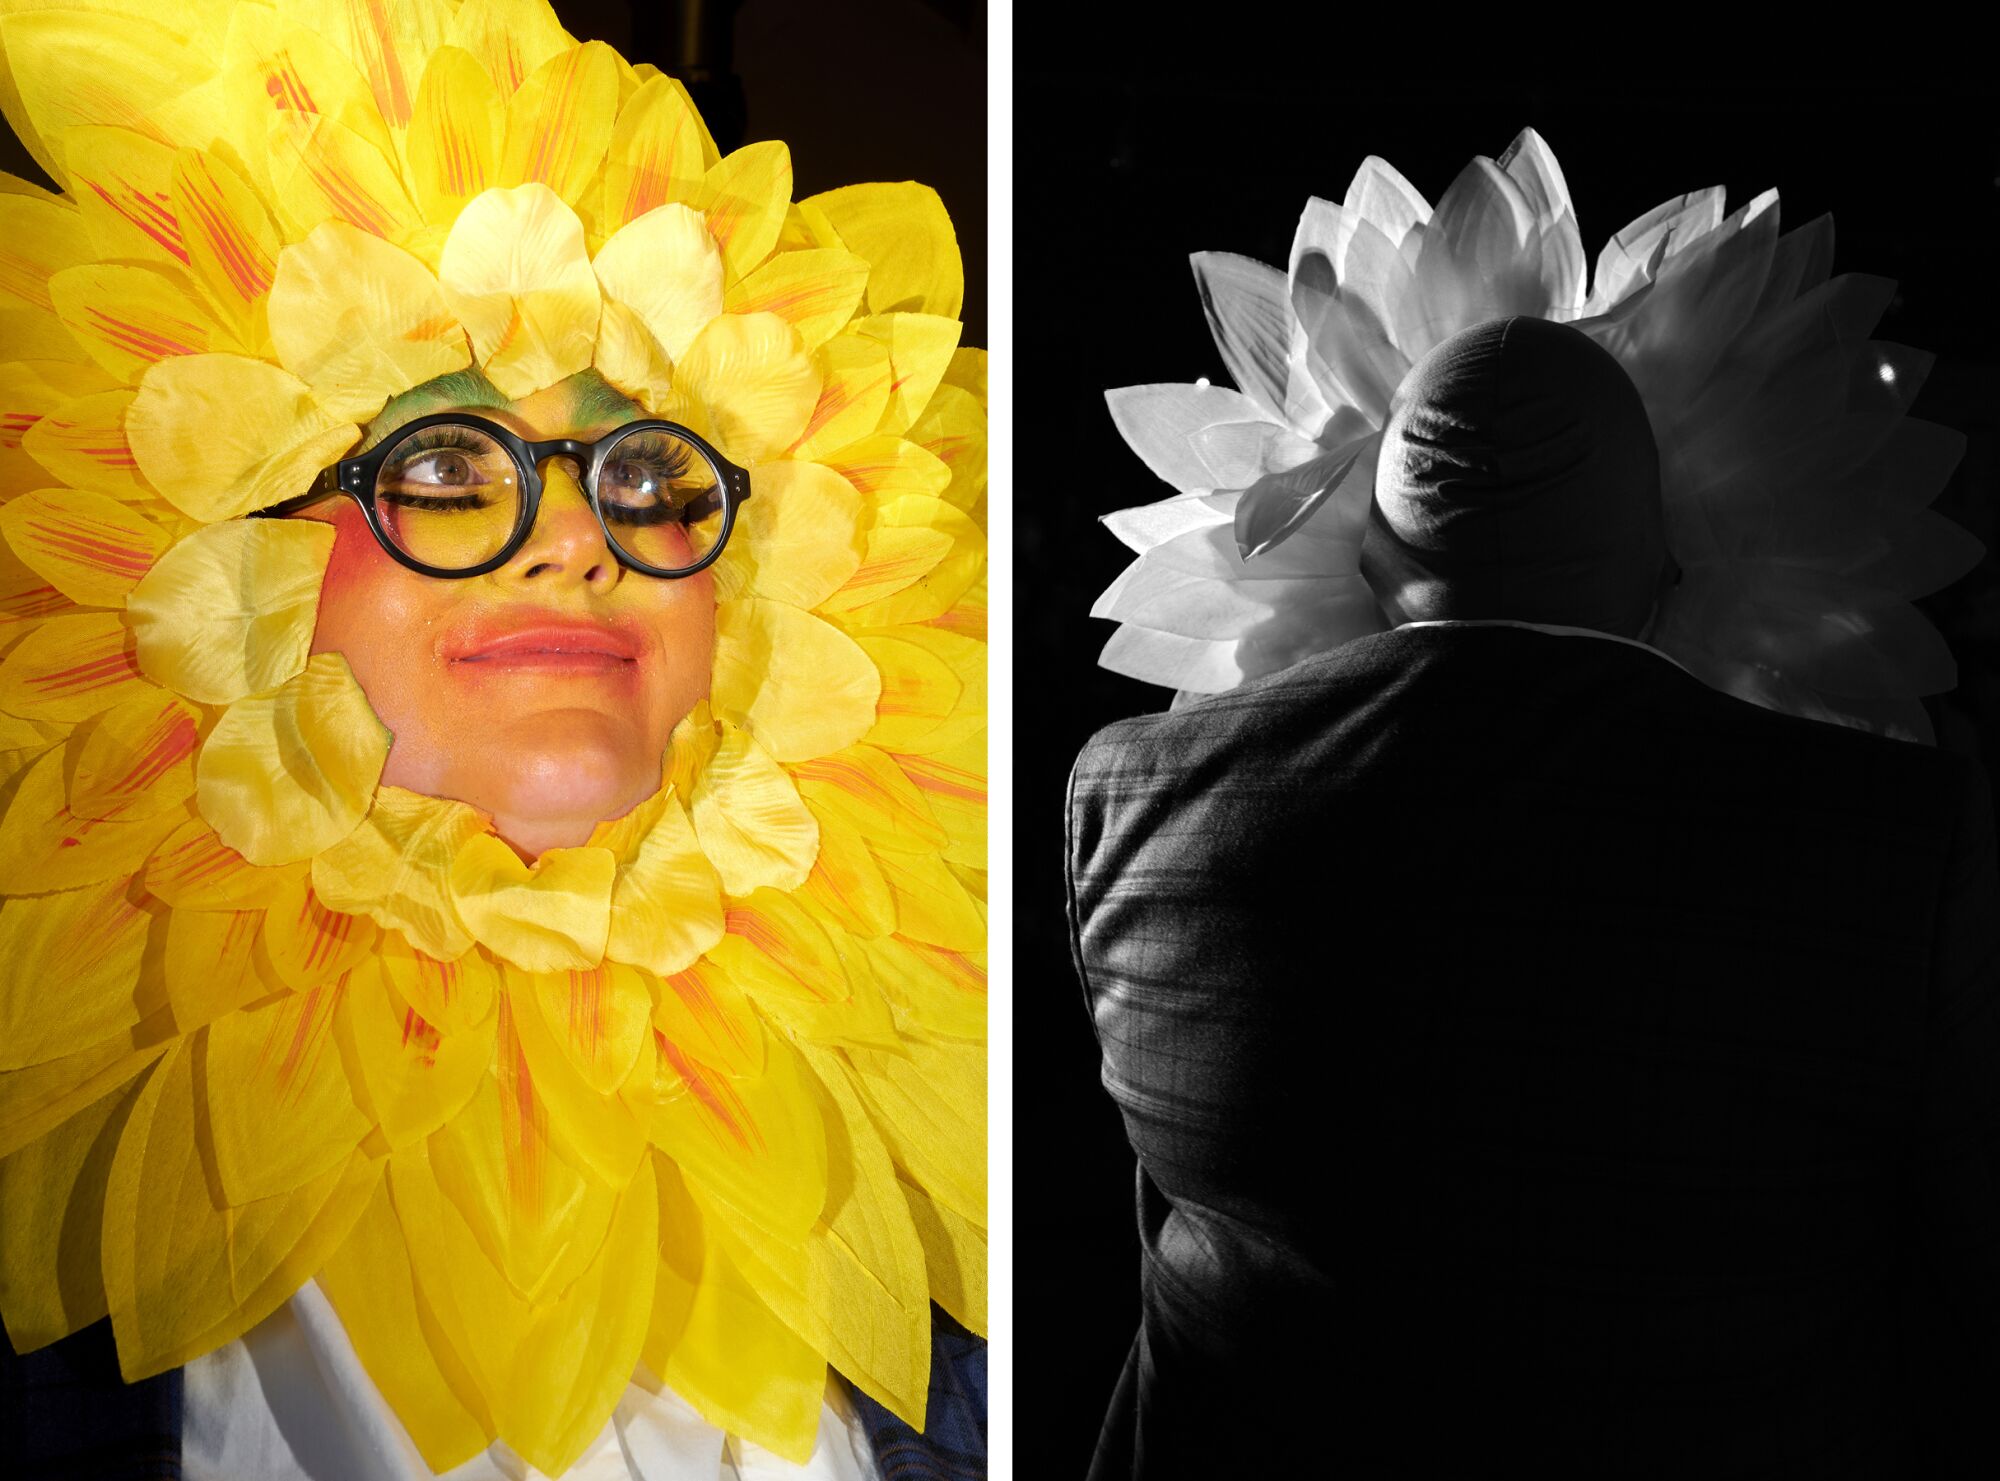 Side-by-side photos of a person with glasses, dressed as a yellow flower